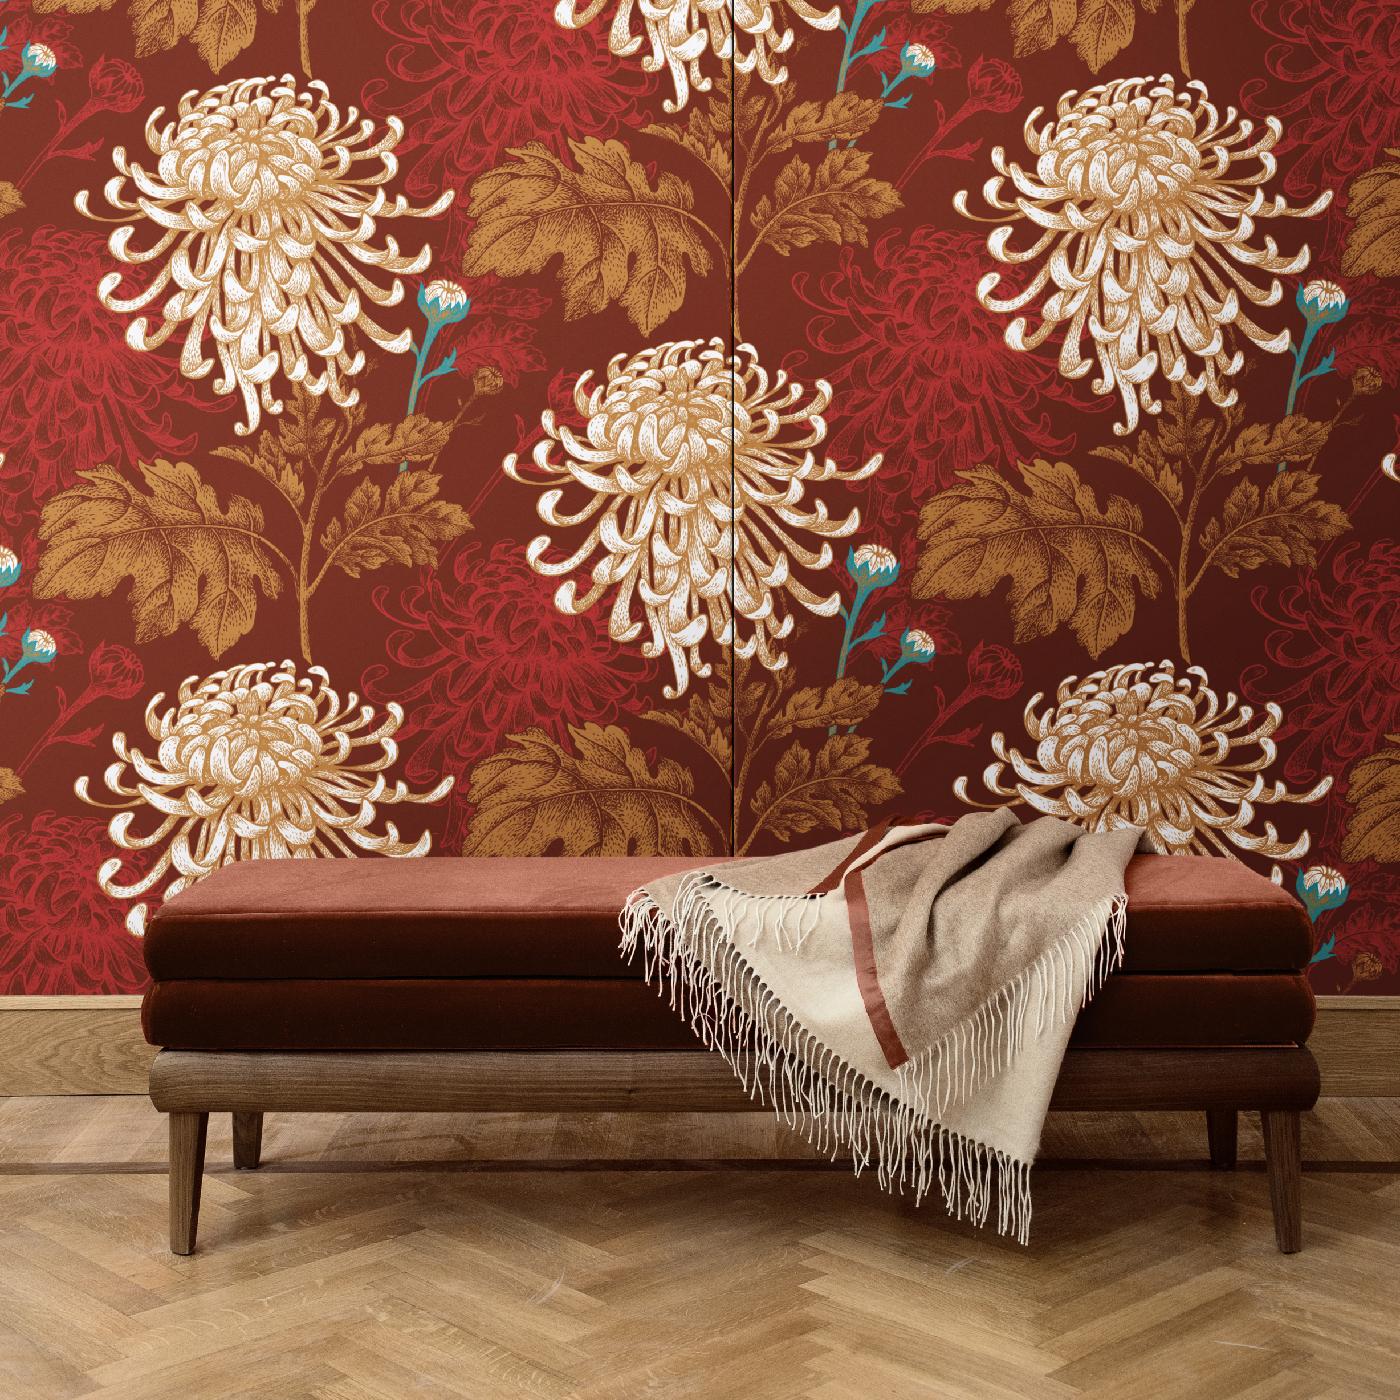 A stunning decoration that will make a statement in any room in the house, this wall covering is part of the Mixed Dahlia series and can be used to add a dramatic accent to a whole room or to highlight a portion of a wall. It was crafted of silk and